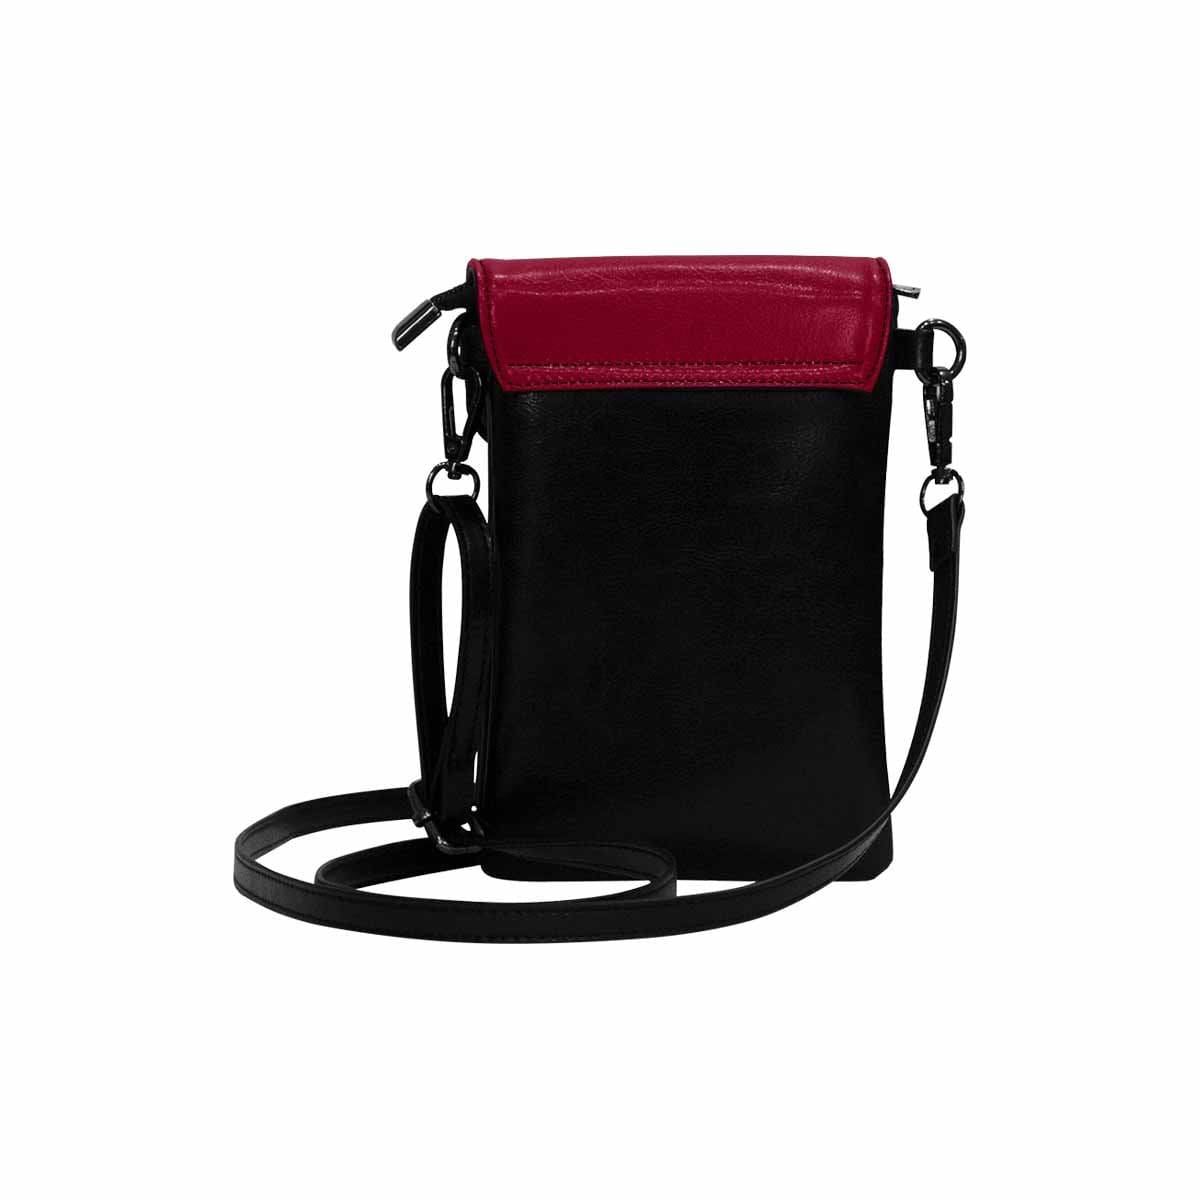 Womens Cell Phone Purse Burgundy Red - Bags | Wallets | Phone Cases